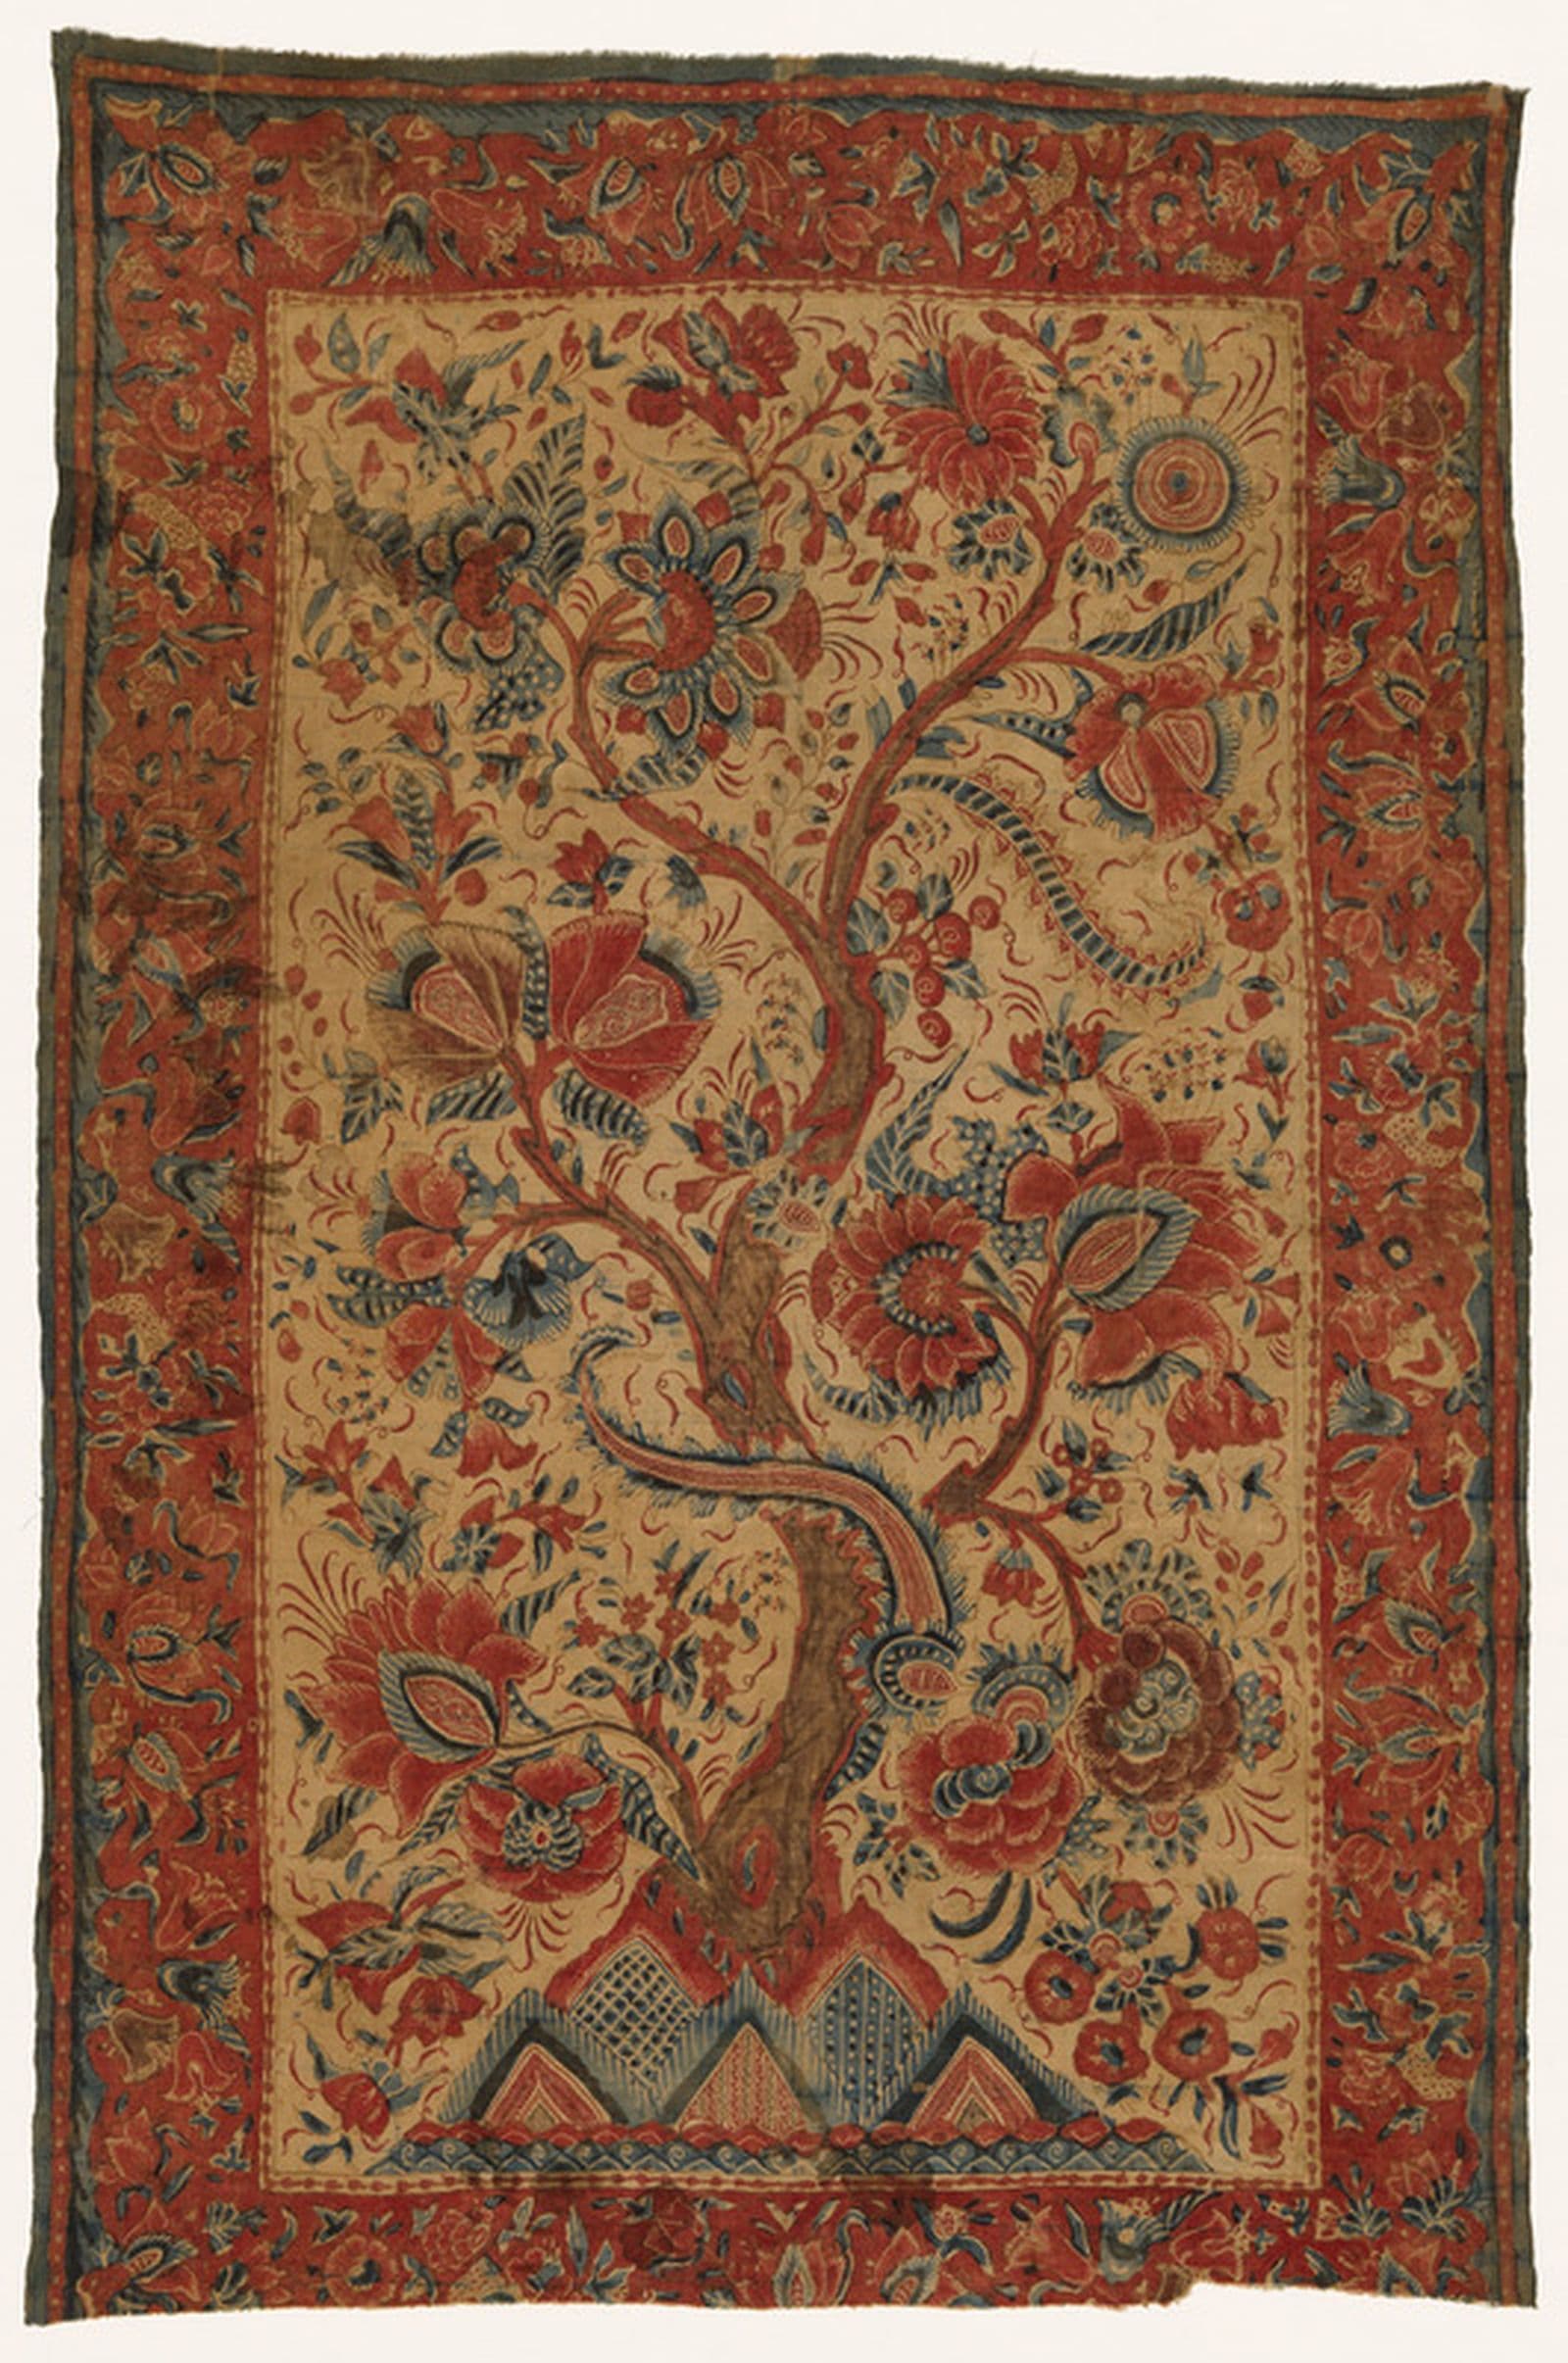 A richly patterned textile with a branch motif and floral borders